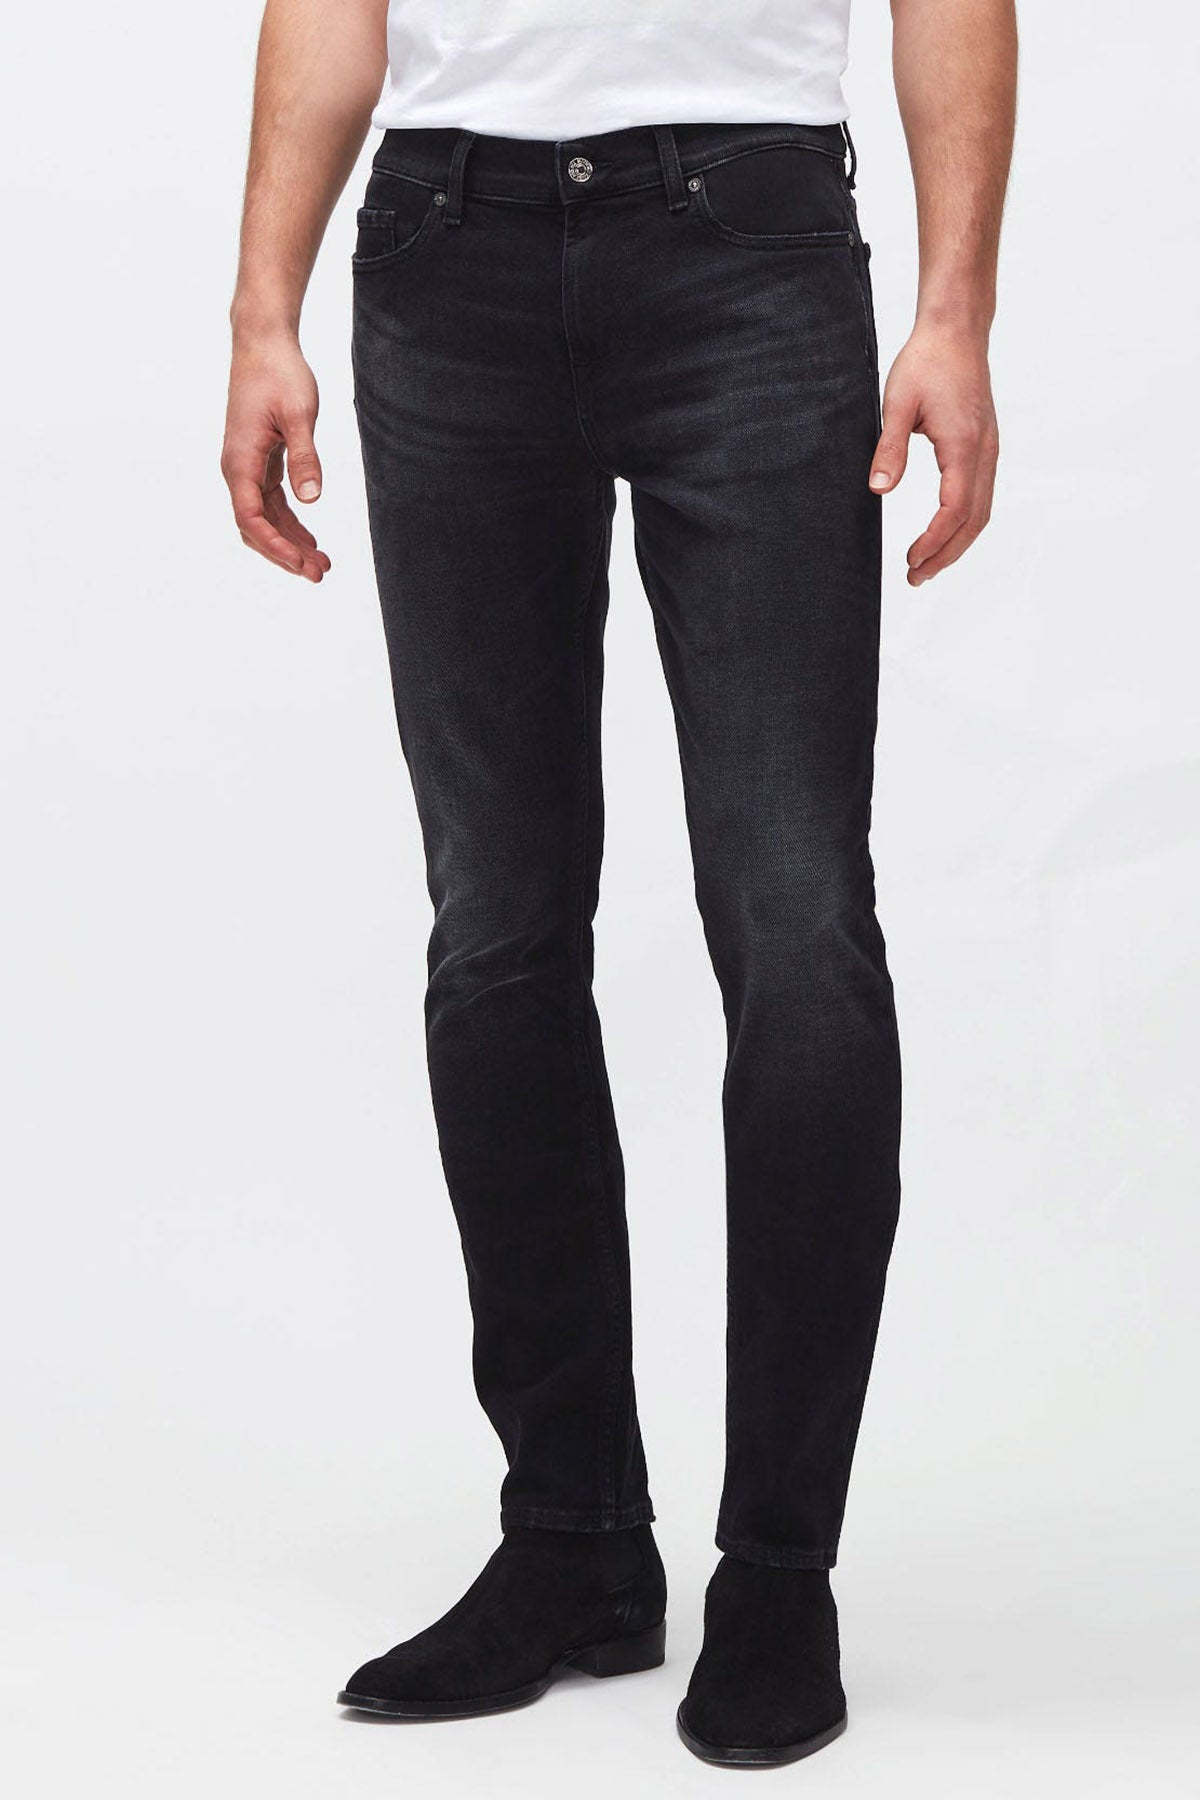 7 For All Mankind Ronnie Skinny Fit Jeans-Libas Trendy Fashion Store